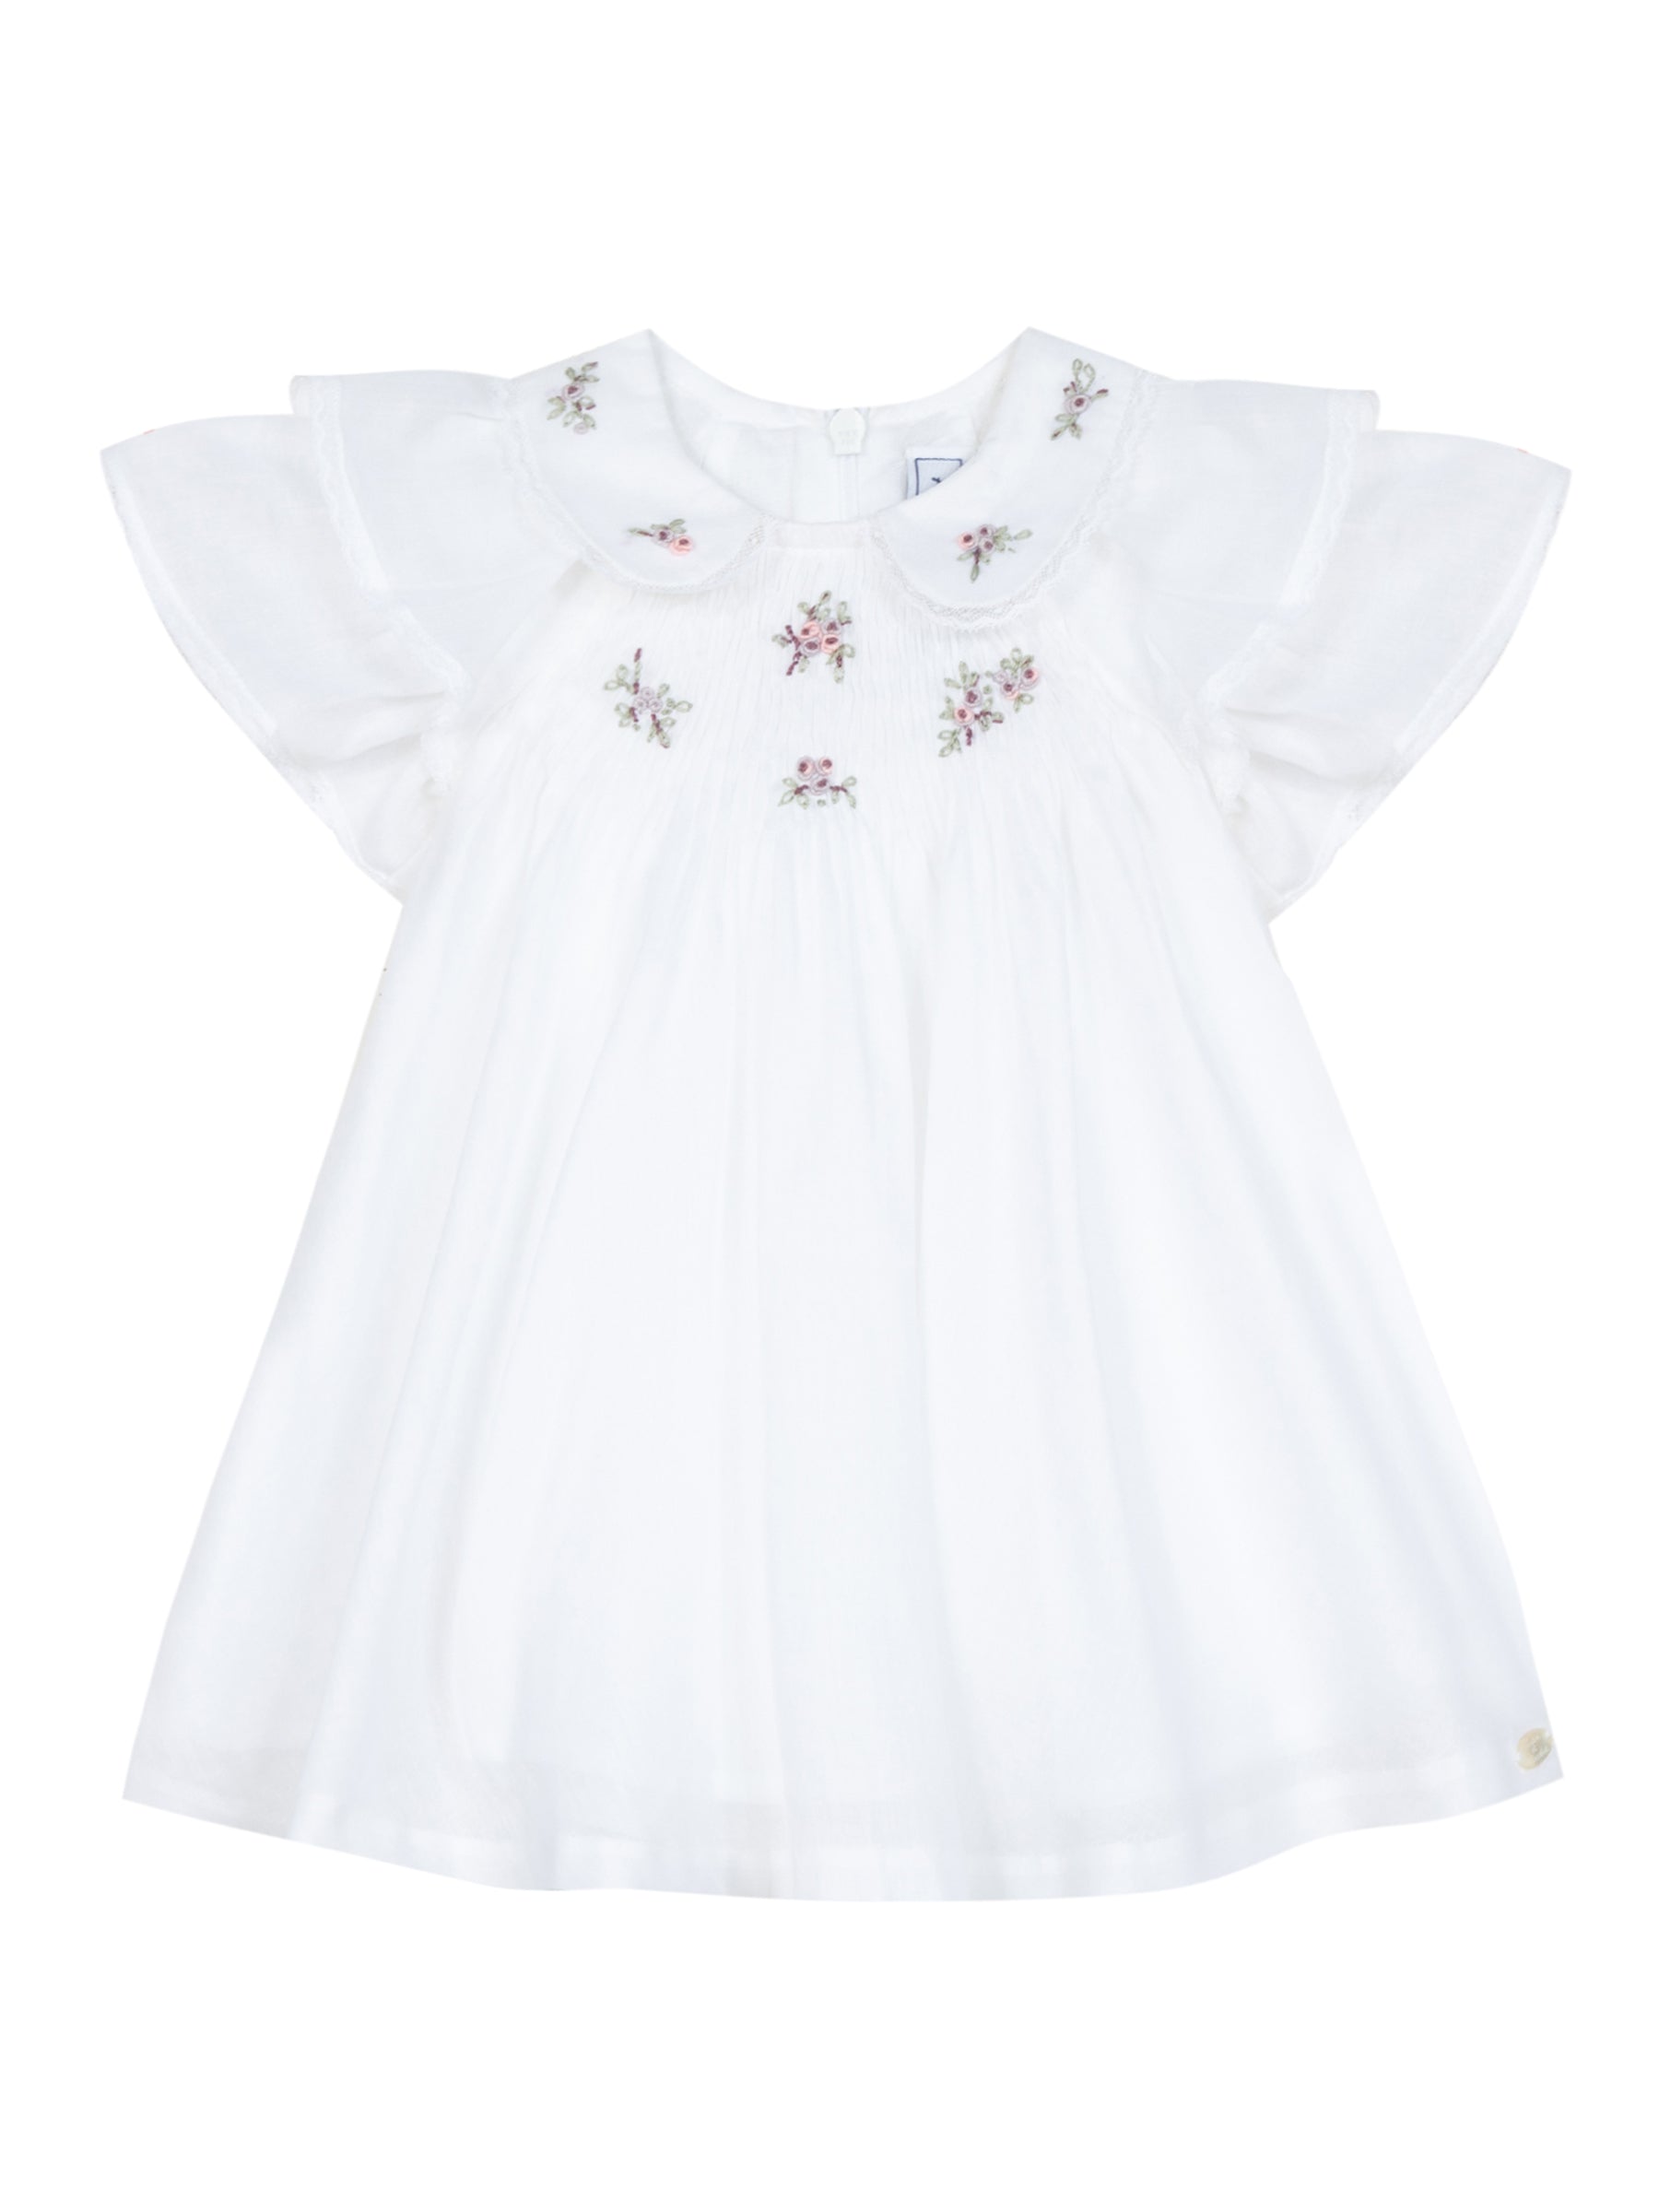 Dress - White cotton with embroidery - Tartine Et Chocolat